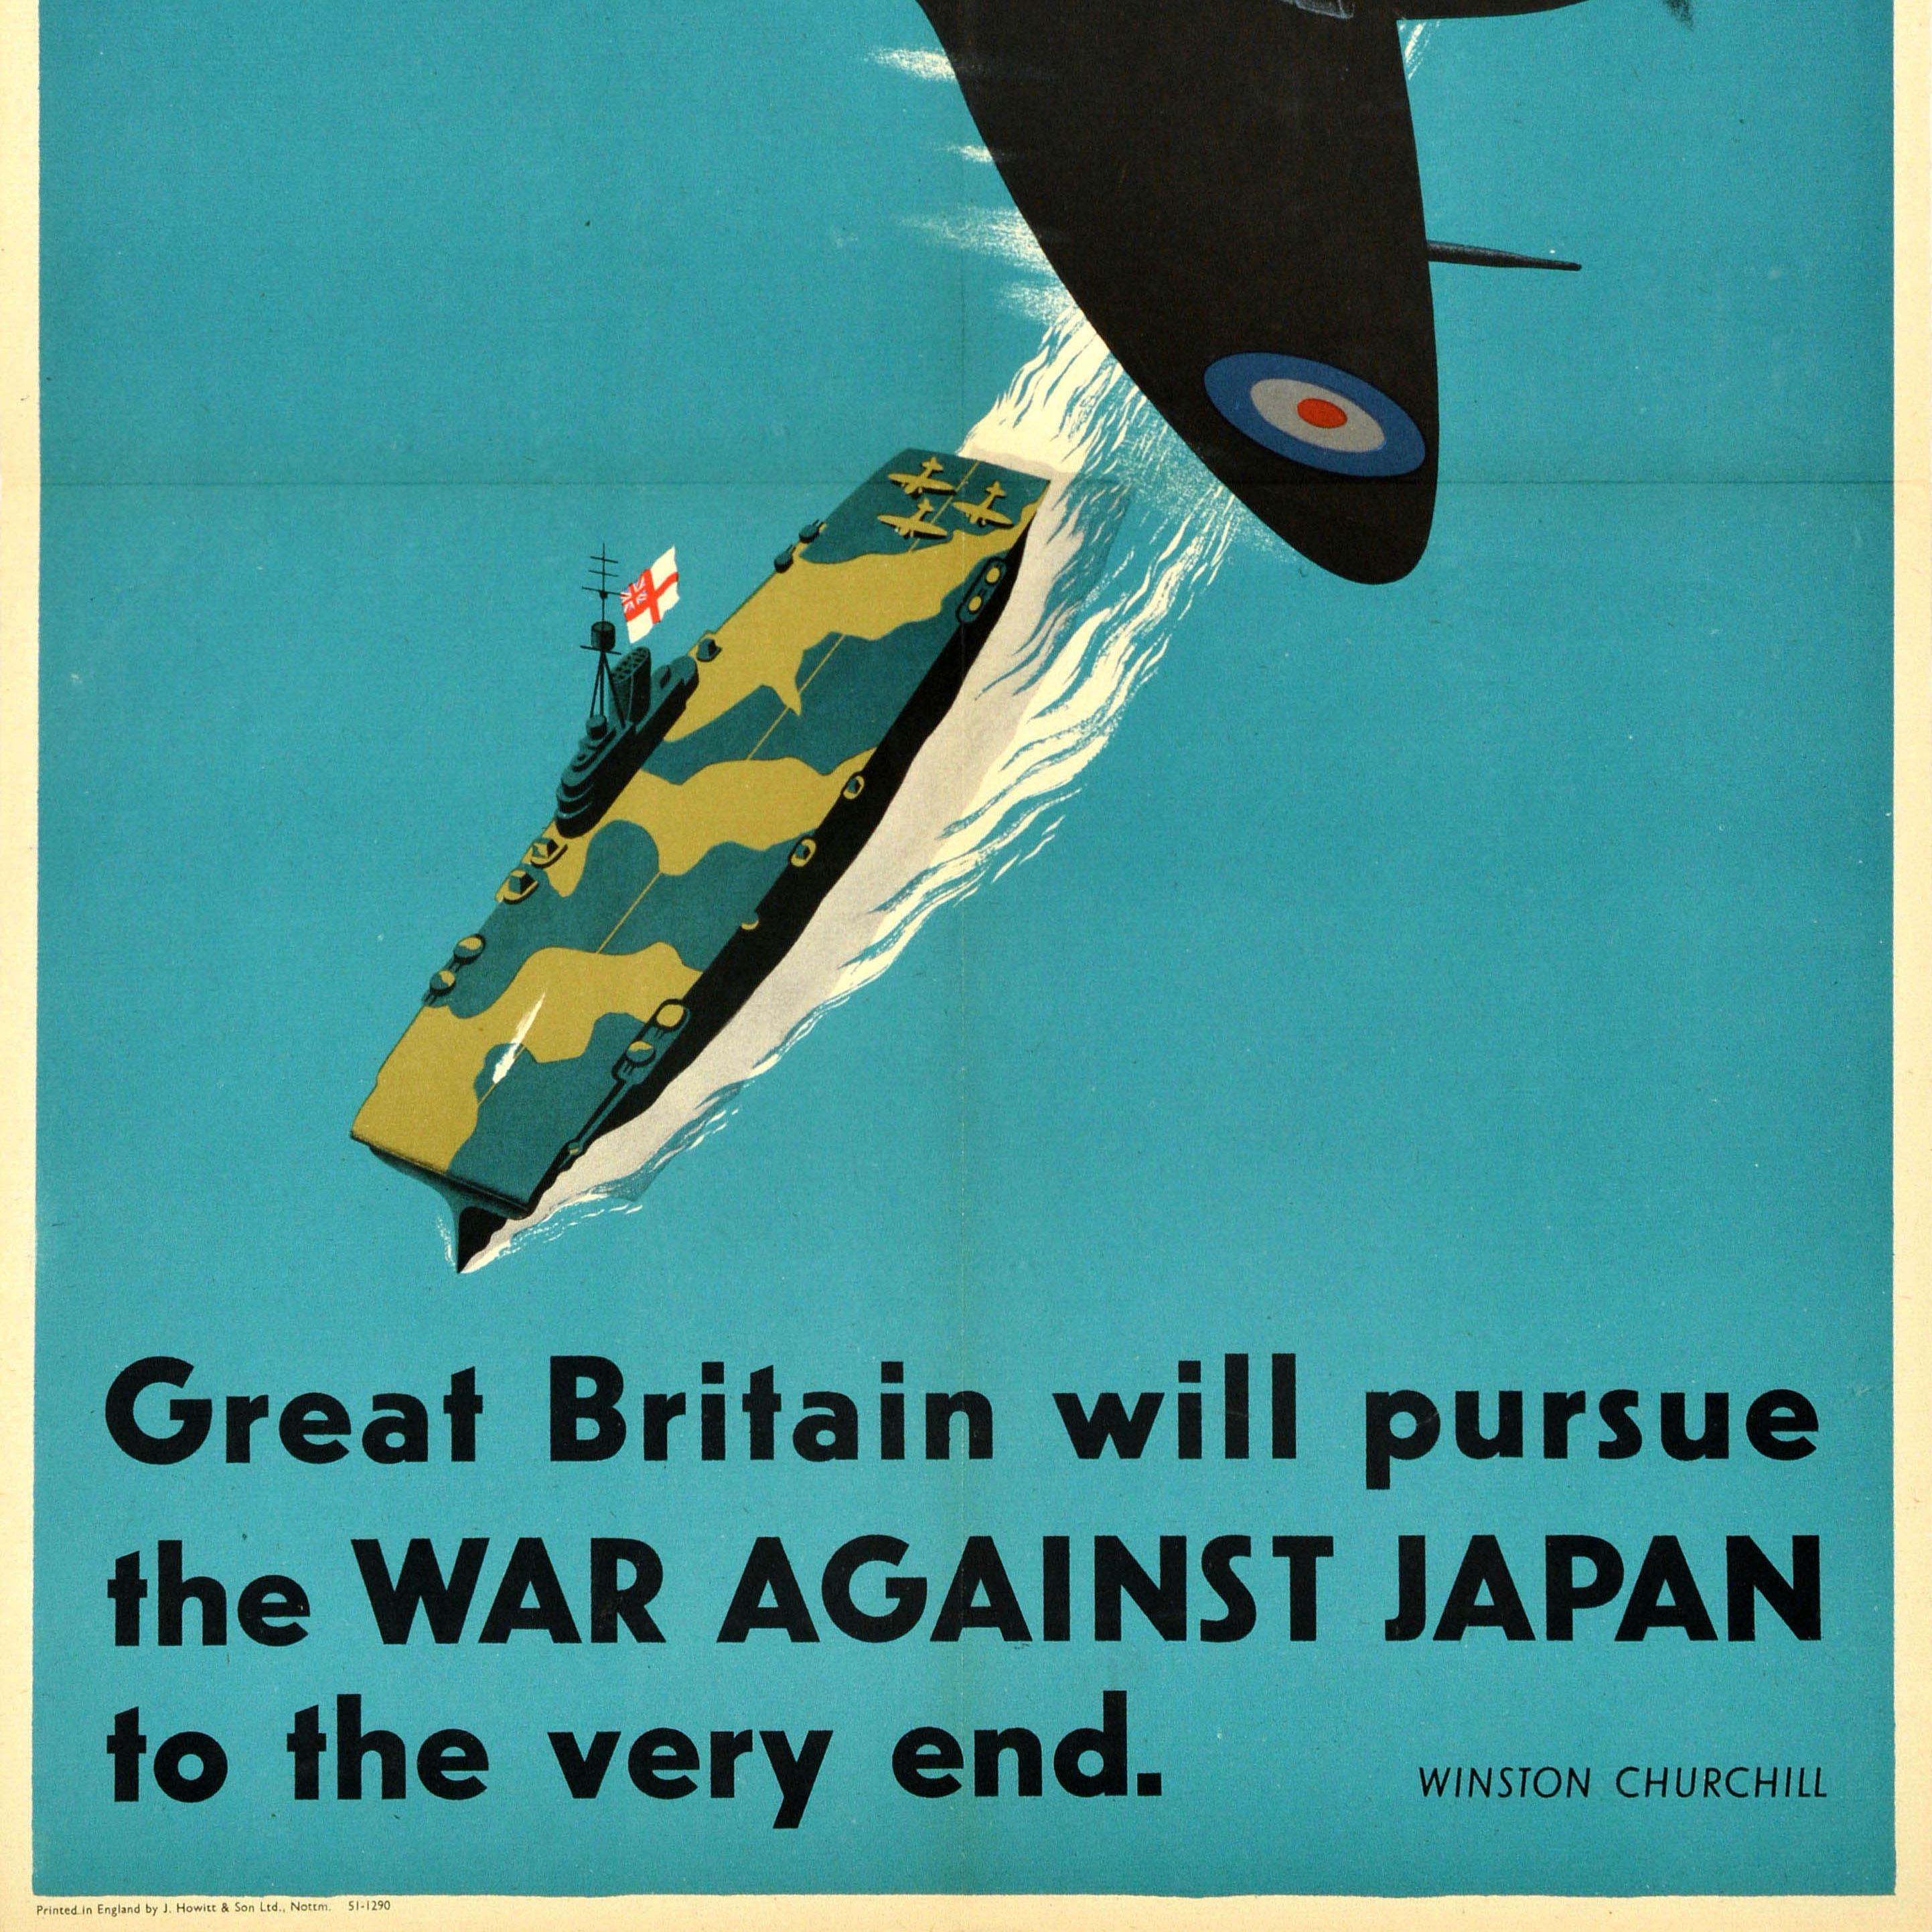 Original vintage World War Two poster featuring an illustration of an RAF Royal Air Force plane flying at speed above a Royal Navy warship in camouflage flying a White Ensign flag, the quote by Winston Churchill below - Great Britain will pursue the